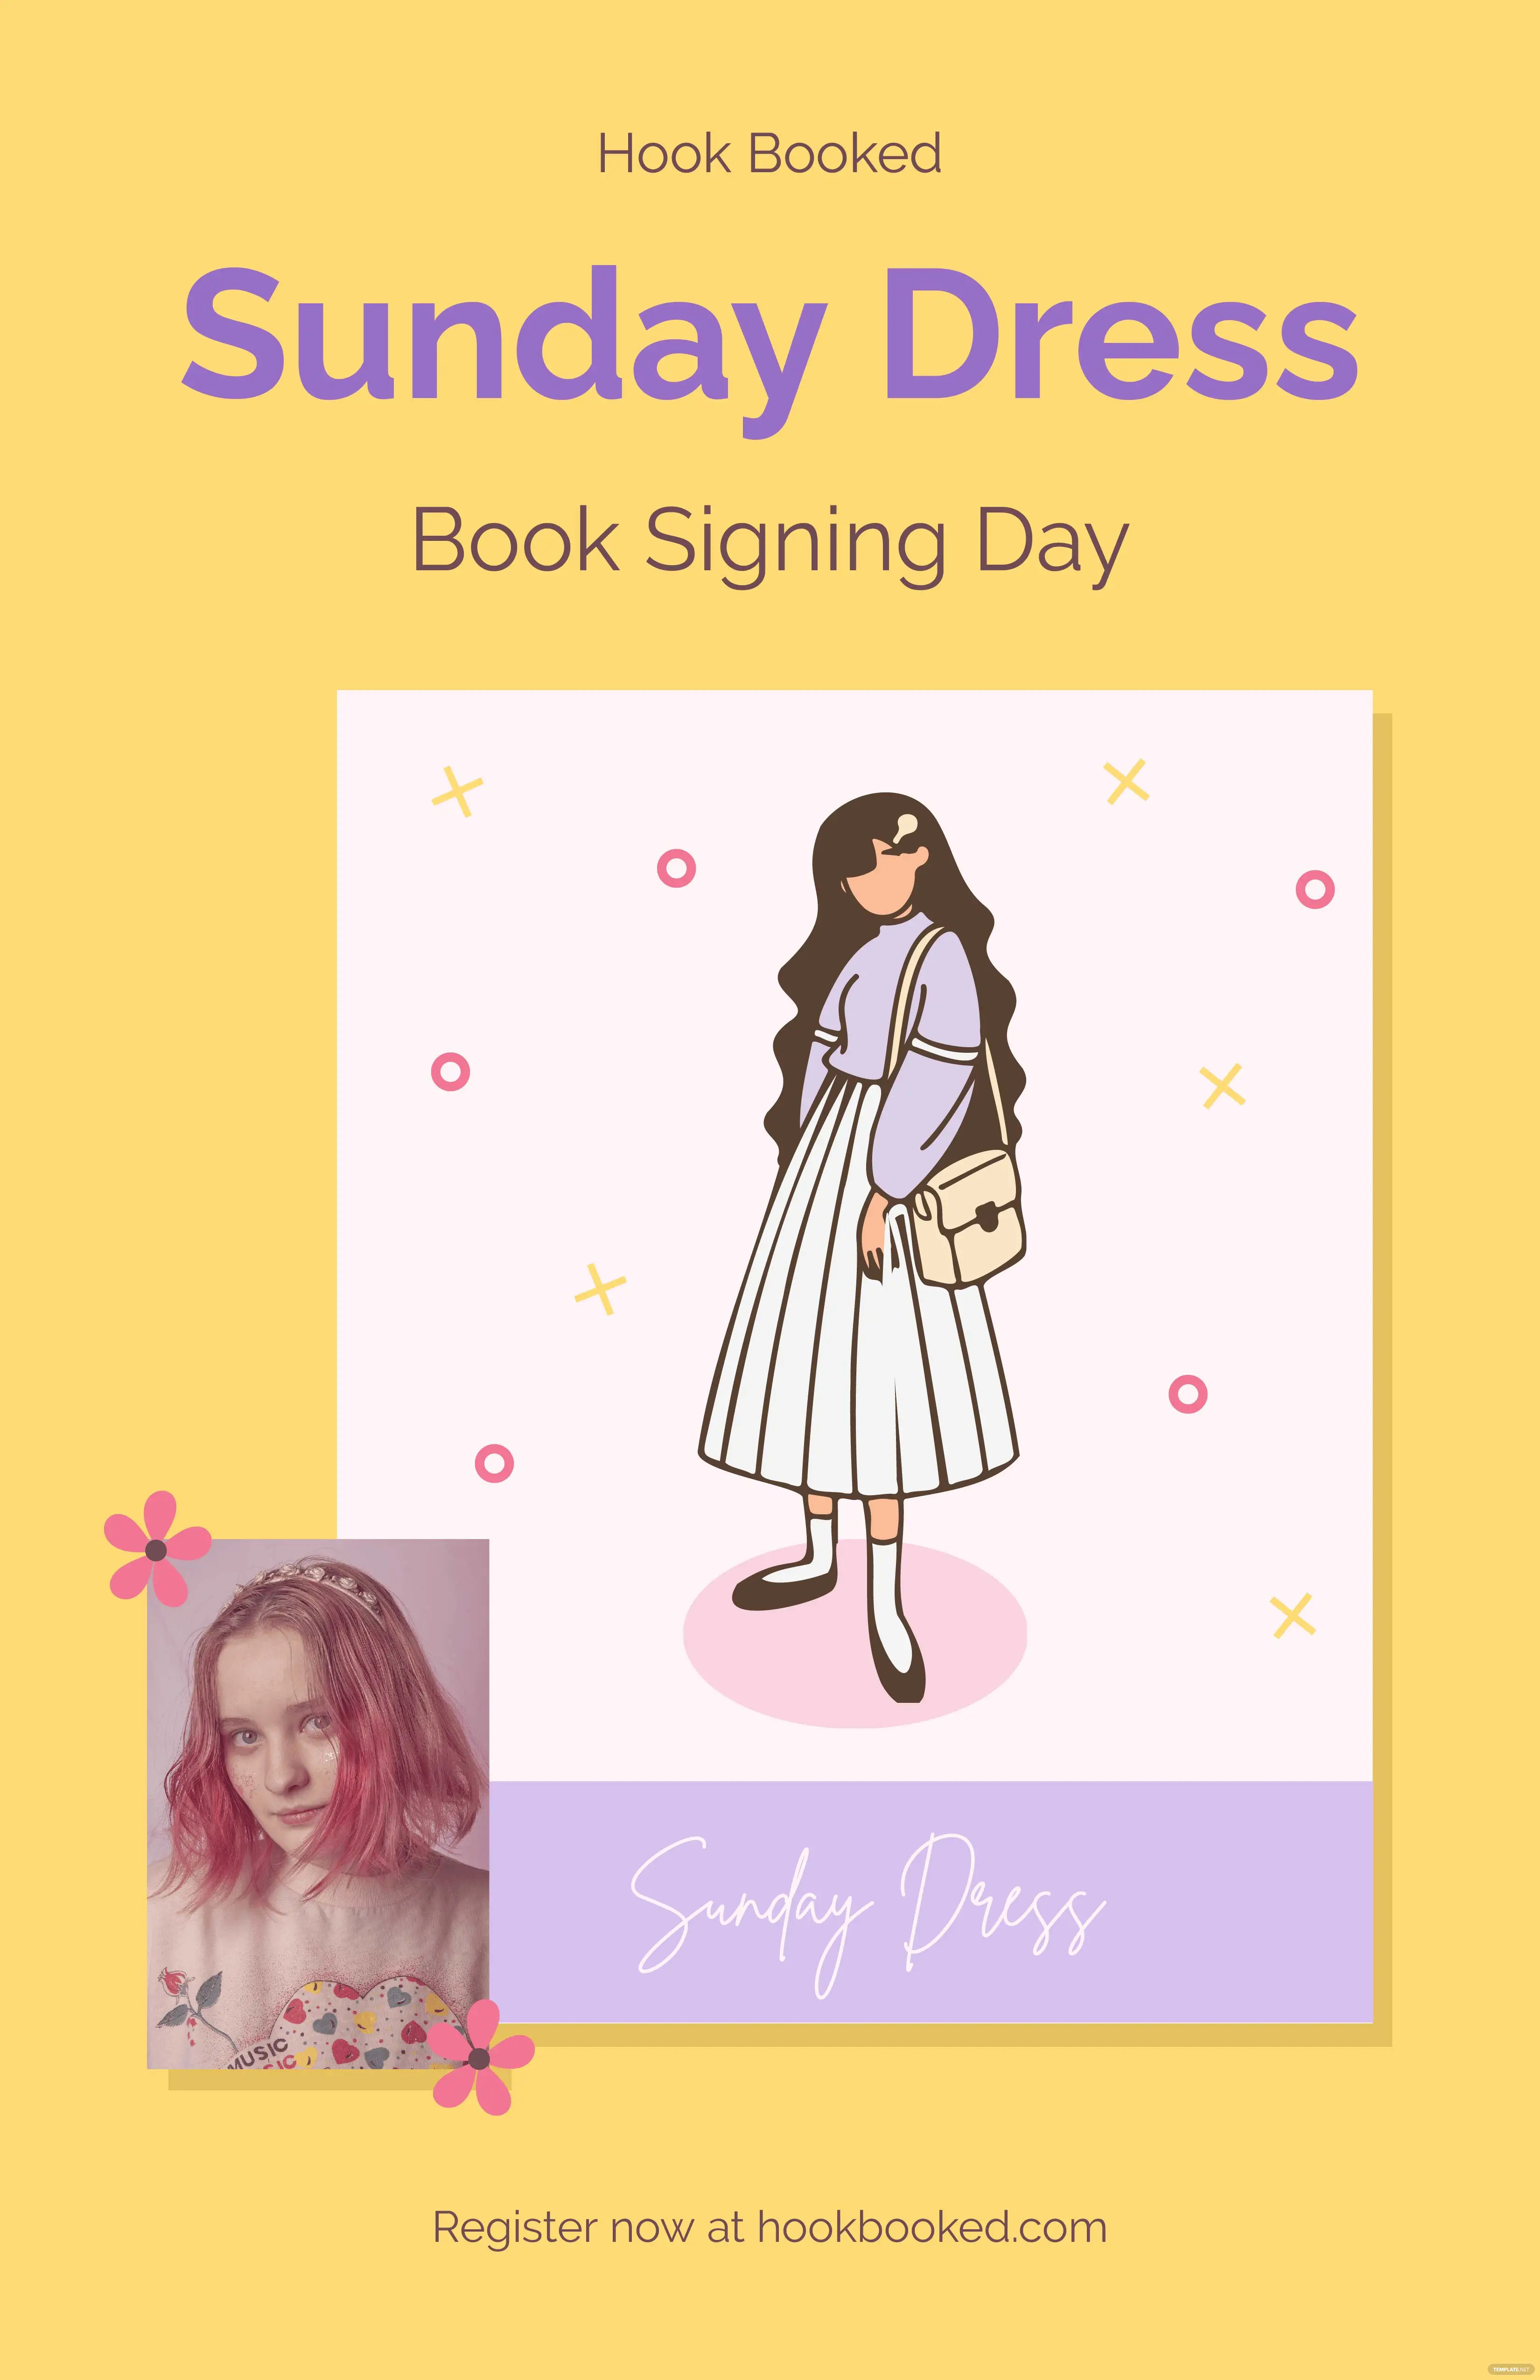 book signing event poster ideas and examples